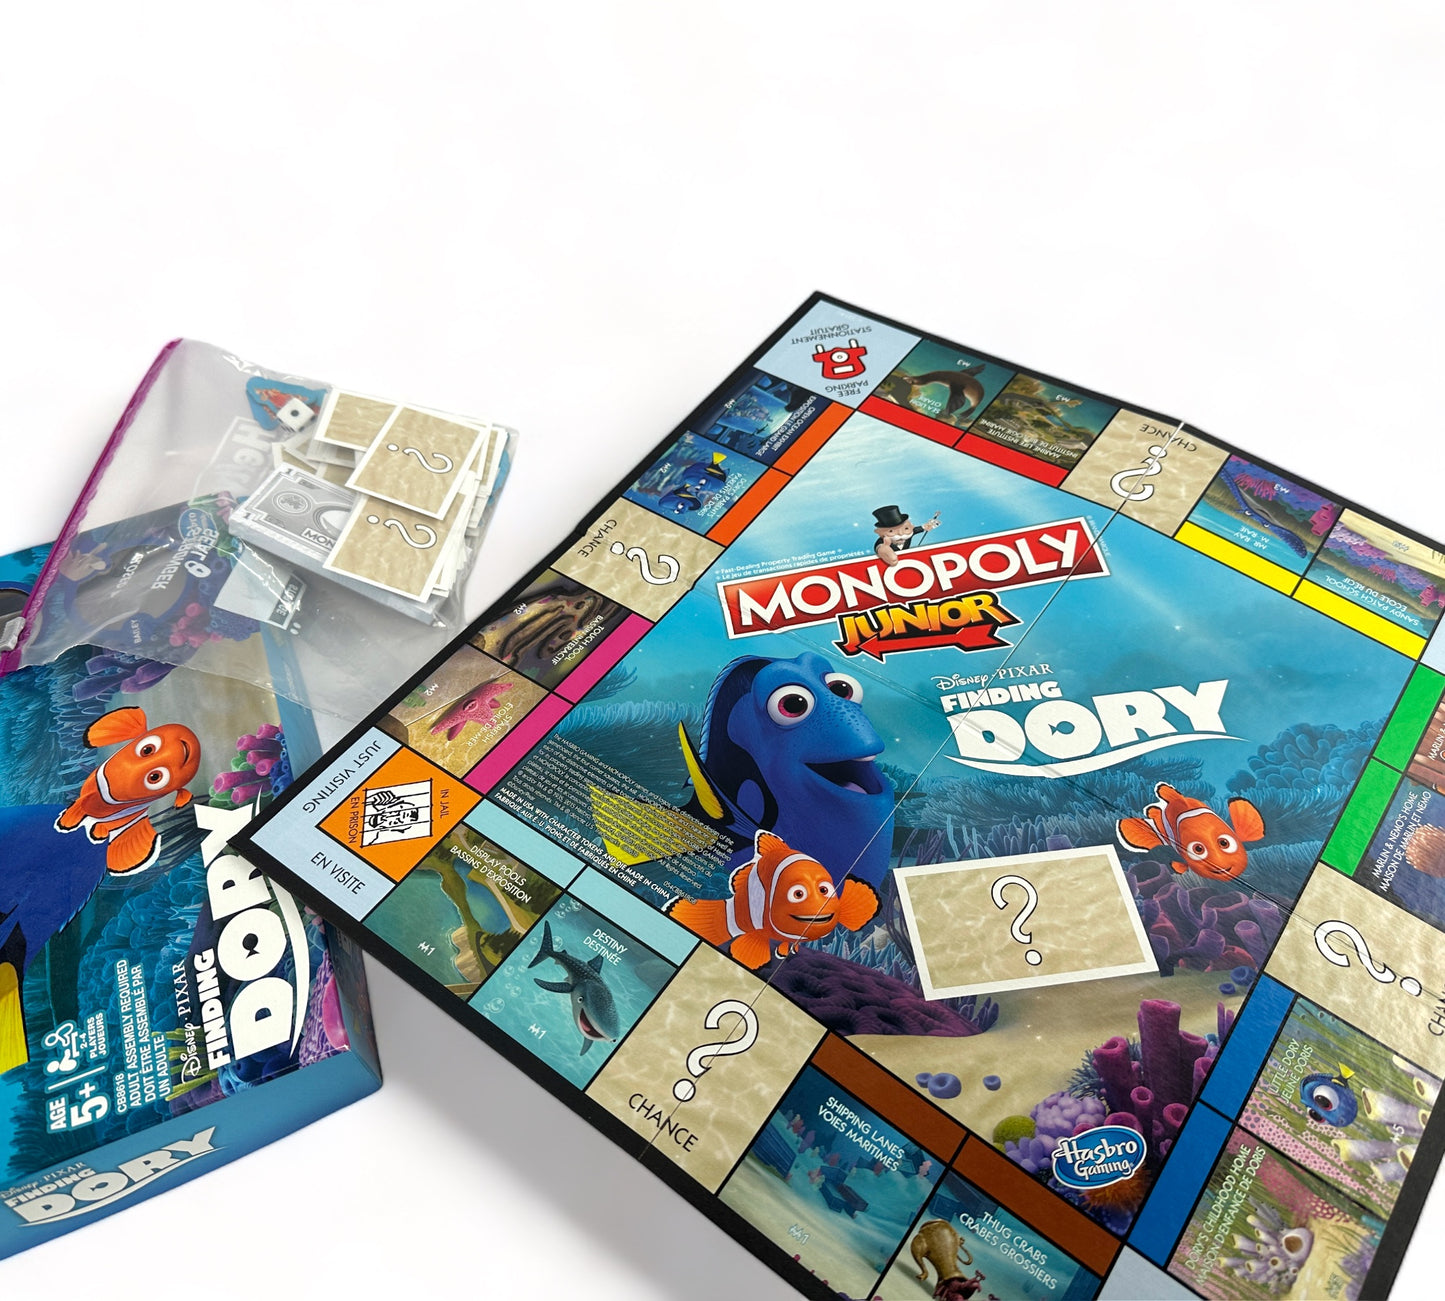 Finding Dory Monopoly Junior